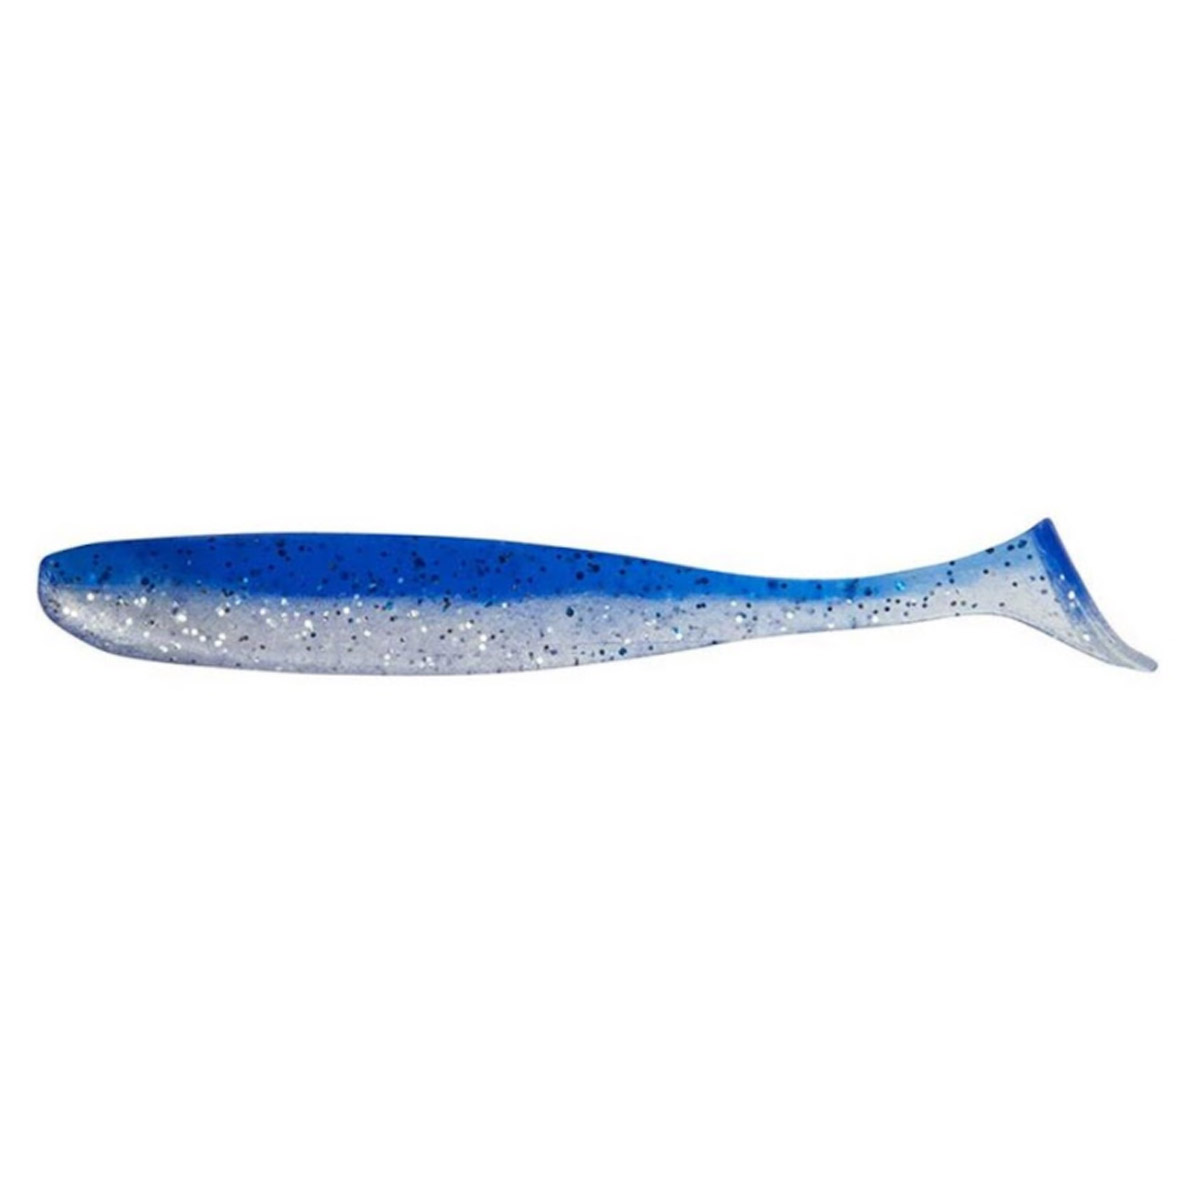 Keitech Easy Shiner 4 inch -  Sparkling Silver Blue